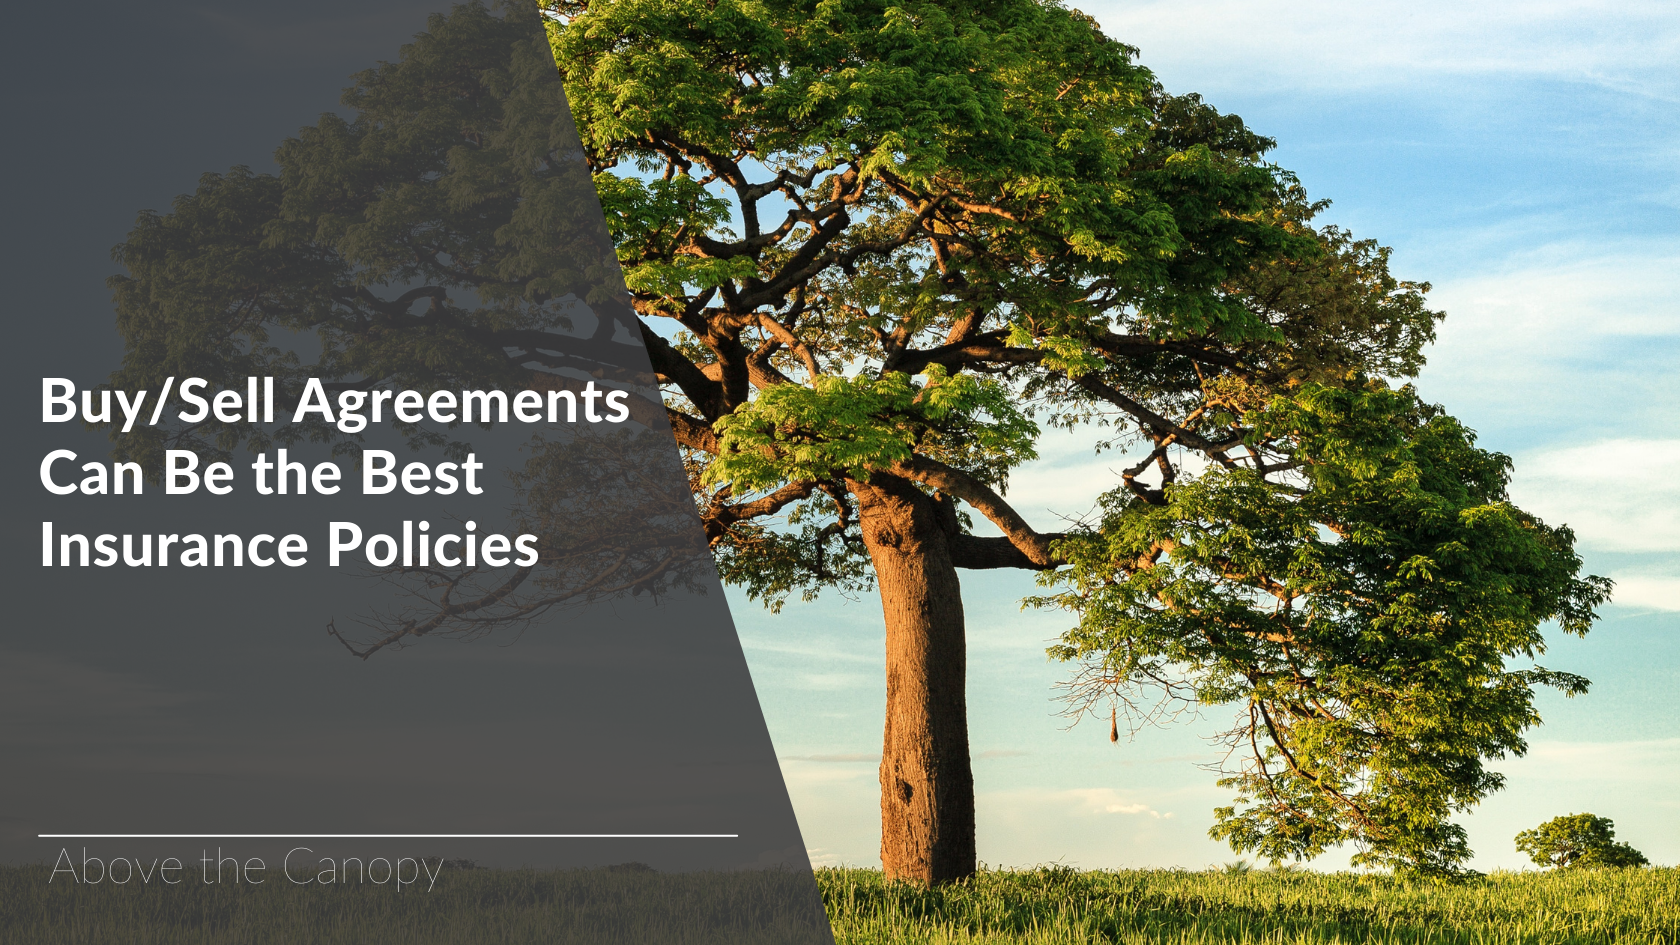 Buy/Sell Agreements Can Be the Best Insurance Policies